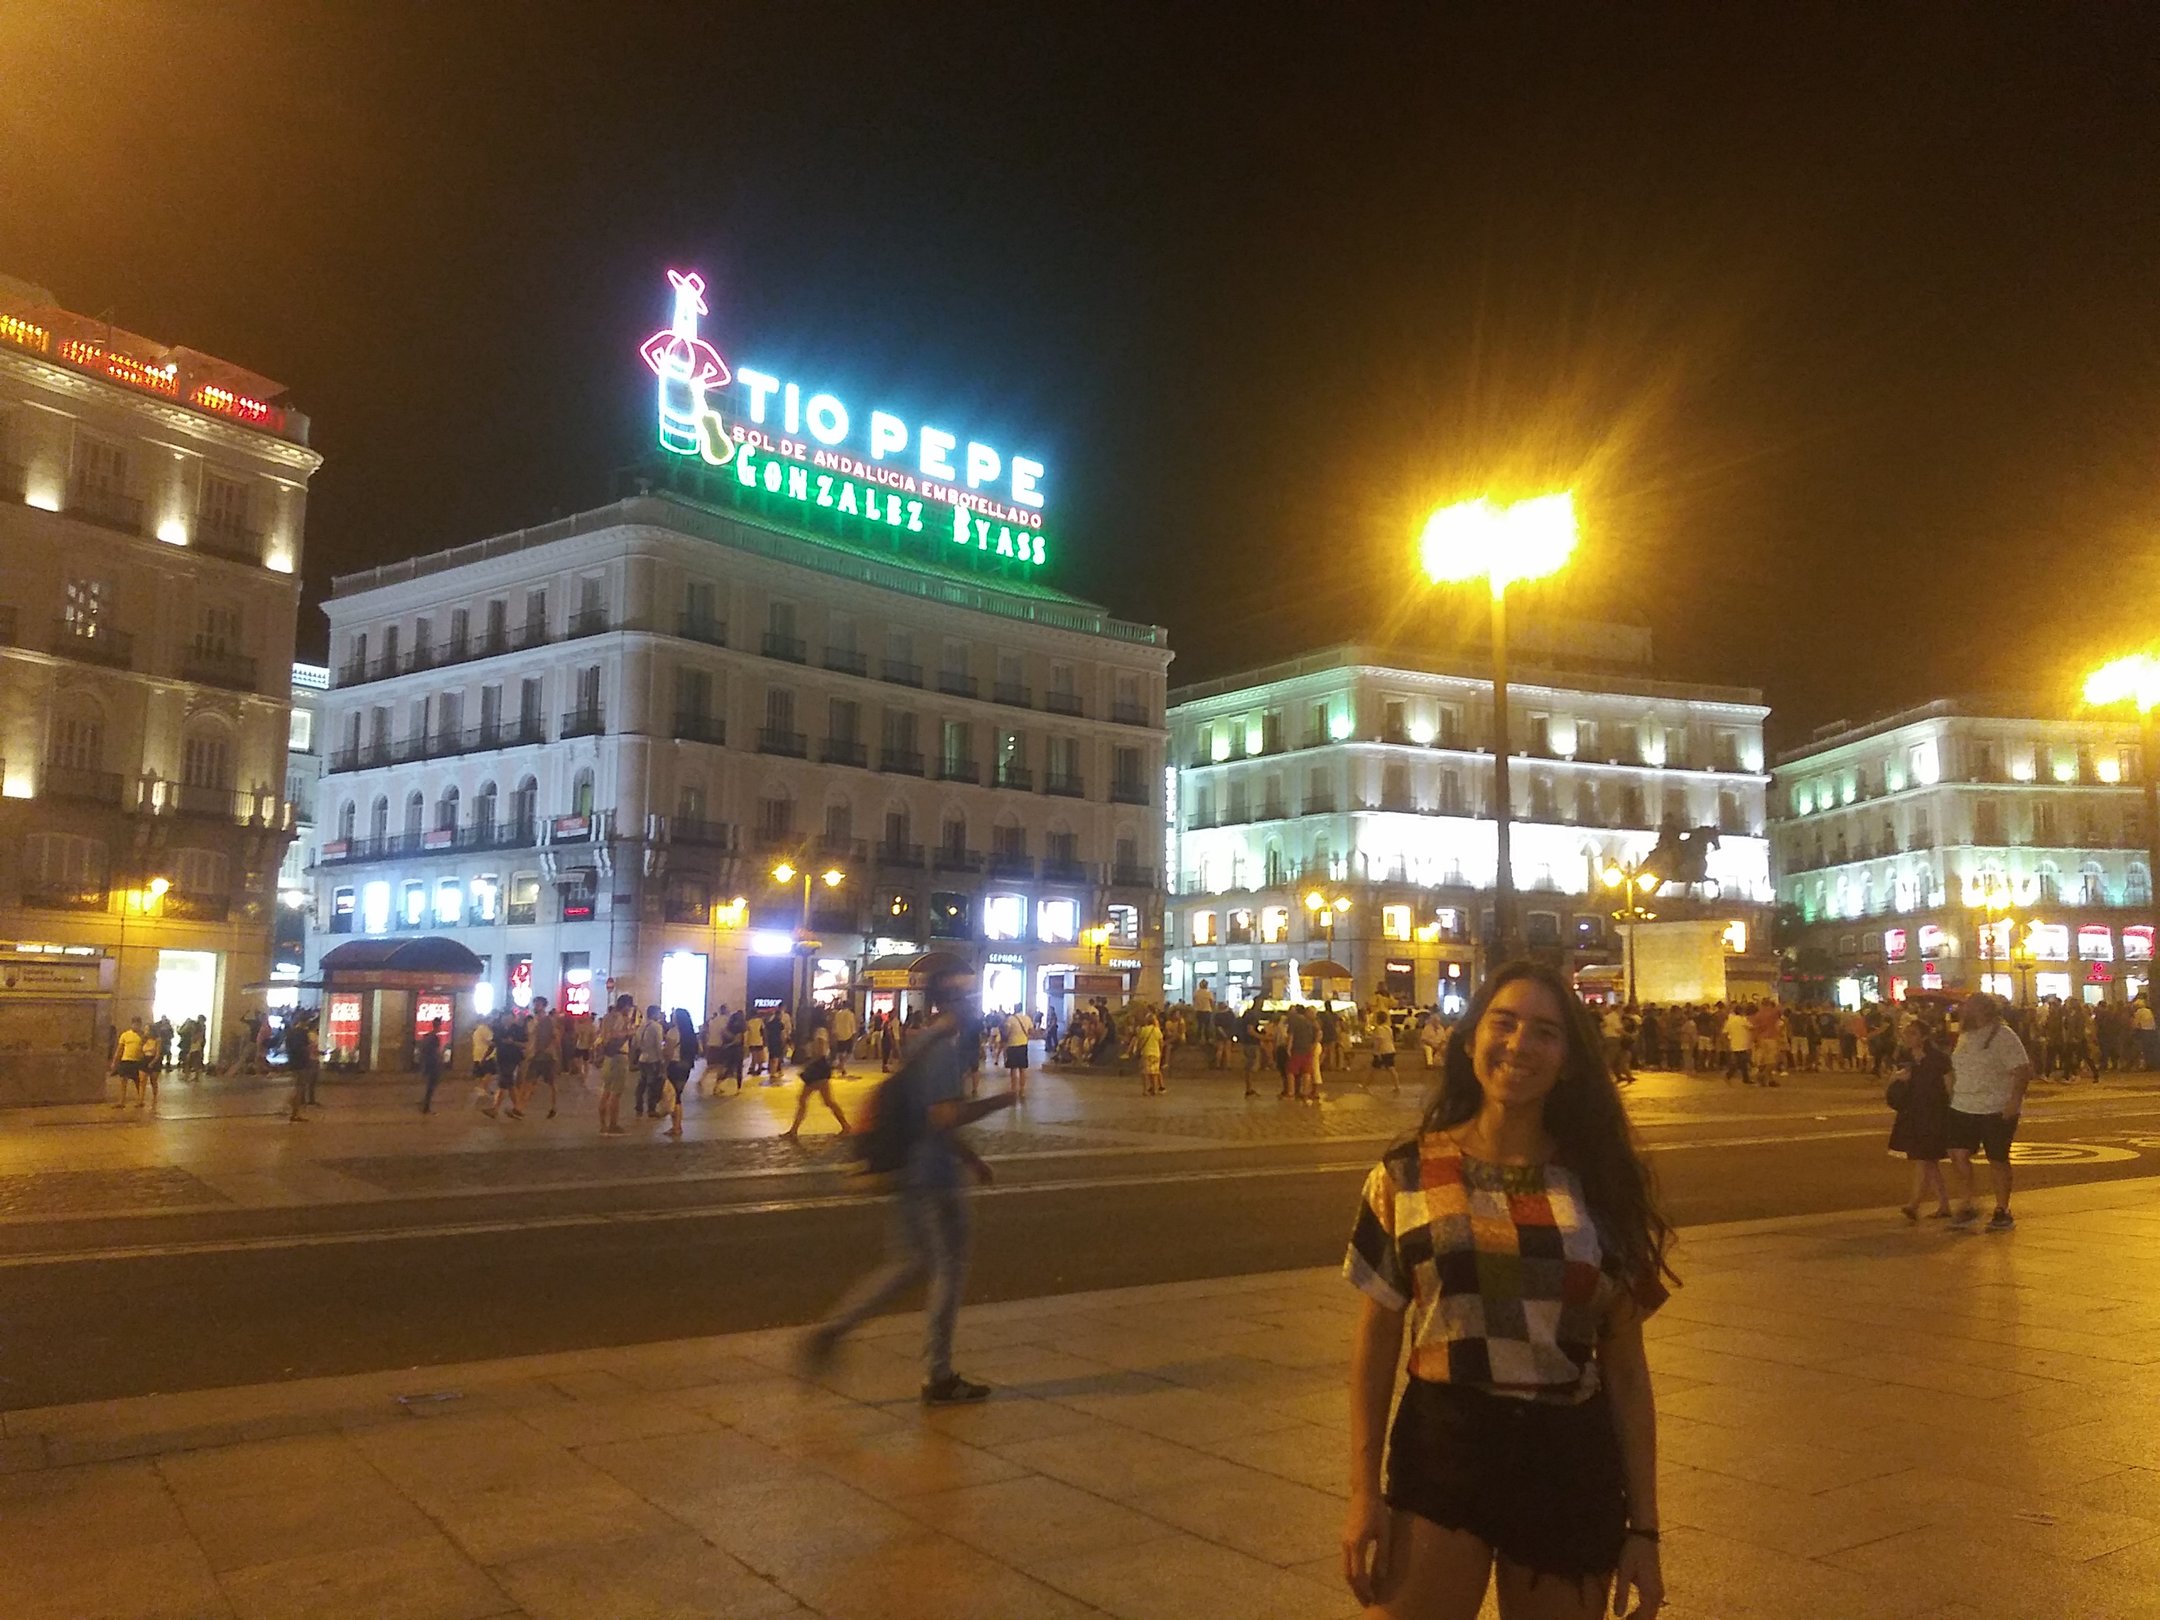 Carla wears a patched shirt with different patterns and black shorts. She stands in front of Puerta del Sol in Madrid, Spain at night where a bright "Tio Pepe" neon sign shines behind her. The plaza is bustling with people.